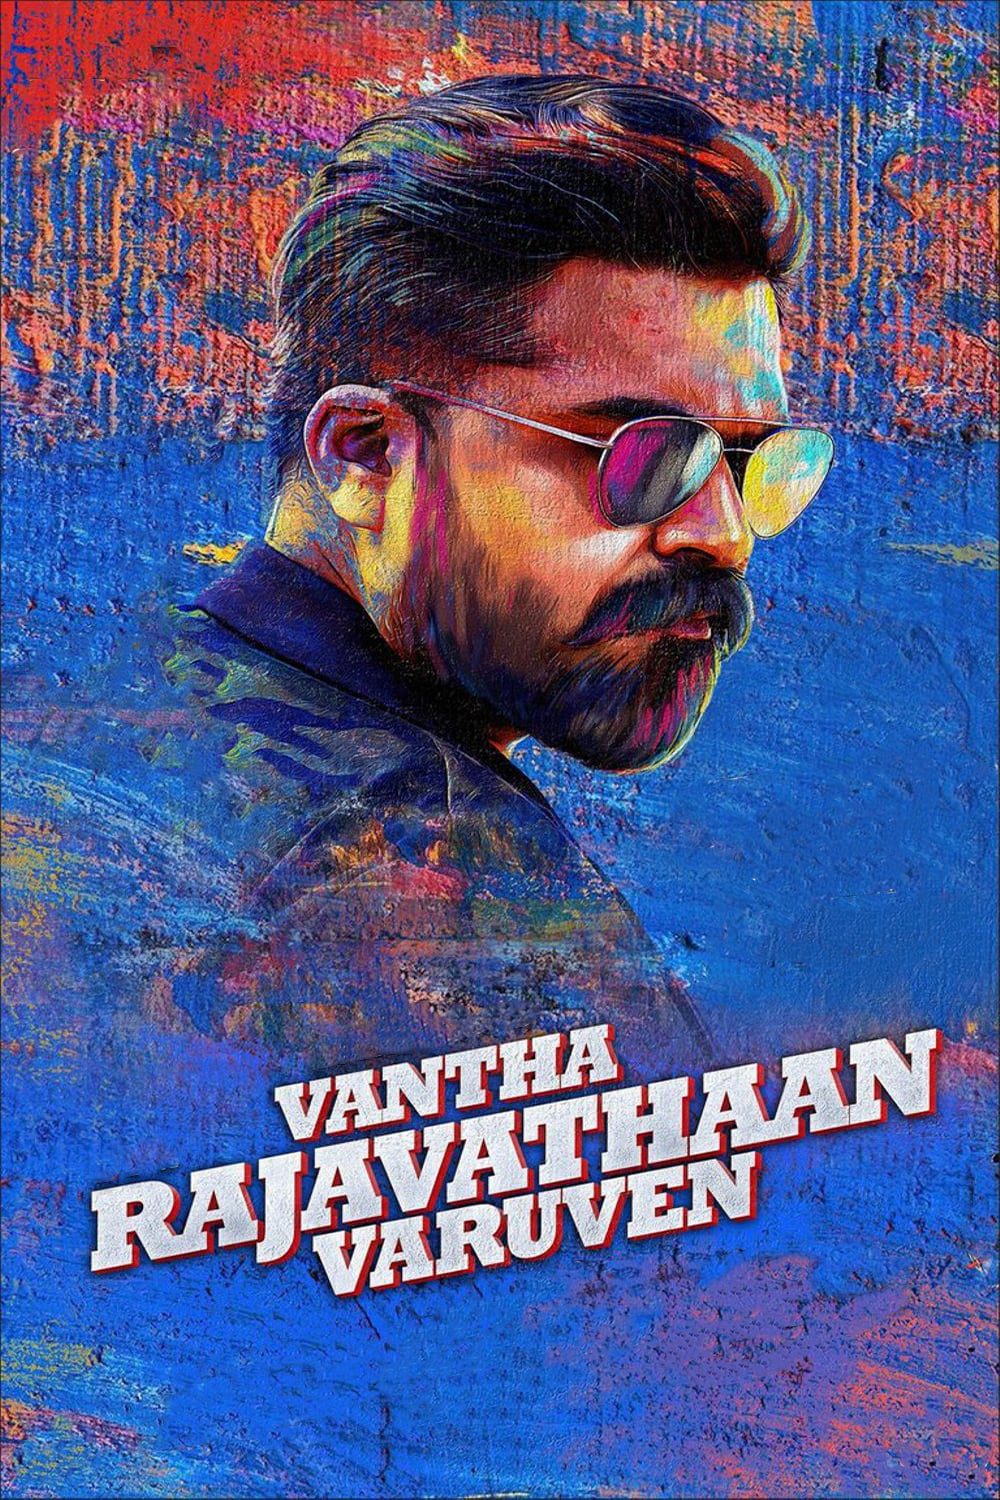 Poster for the movie "Vantha Rajavathaan Varuven"